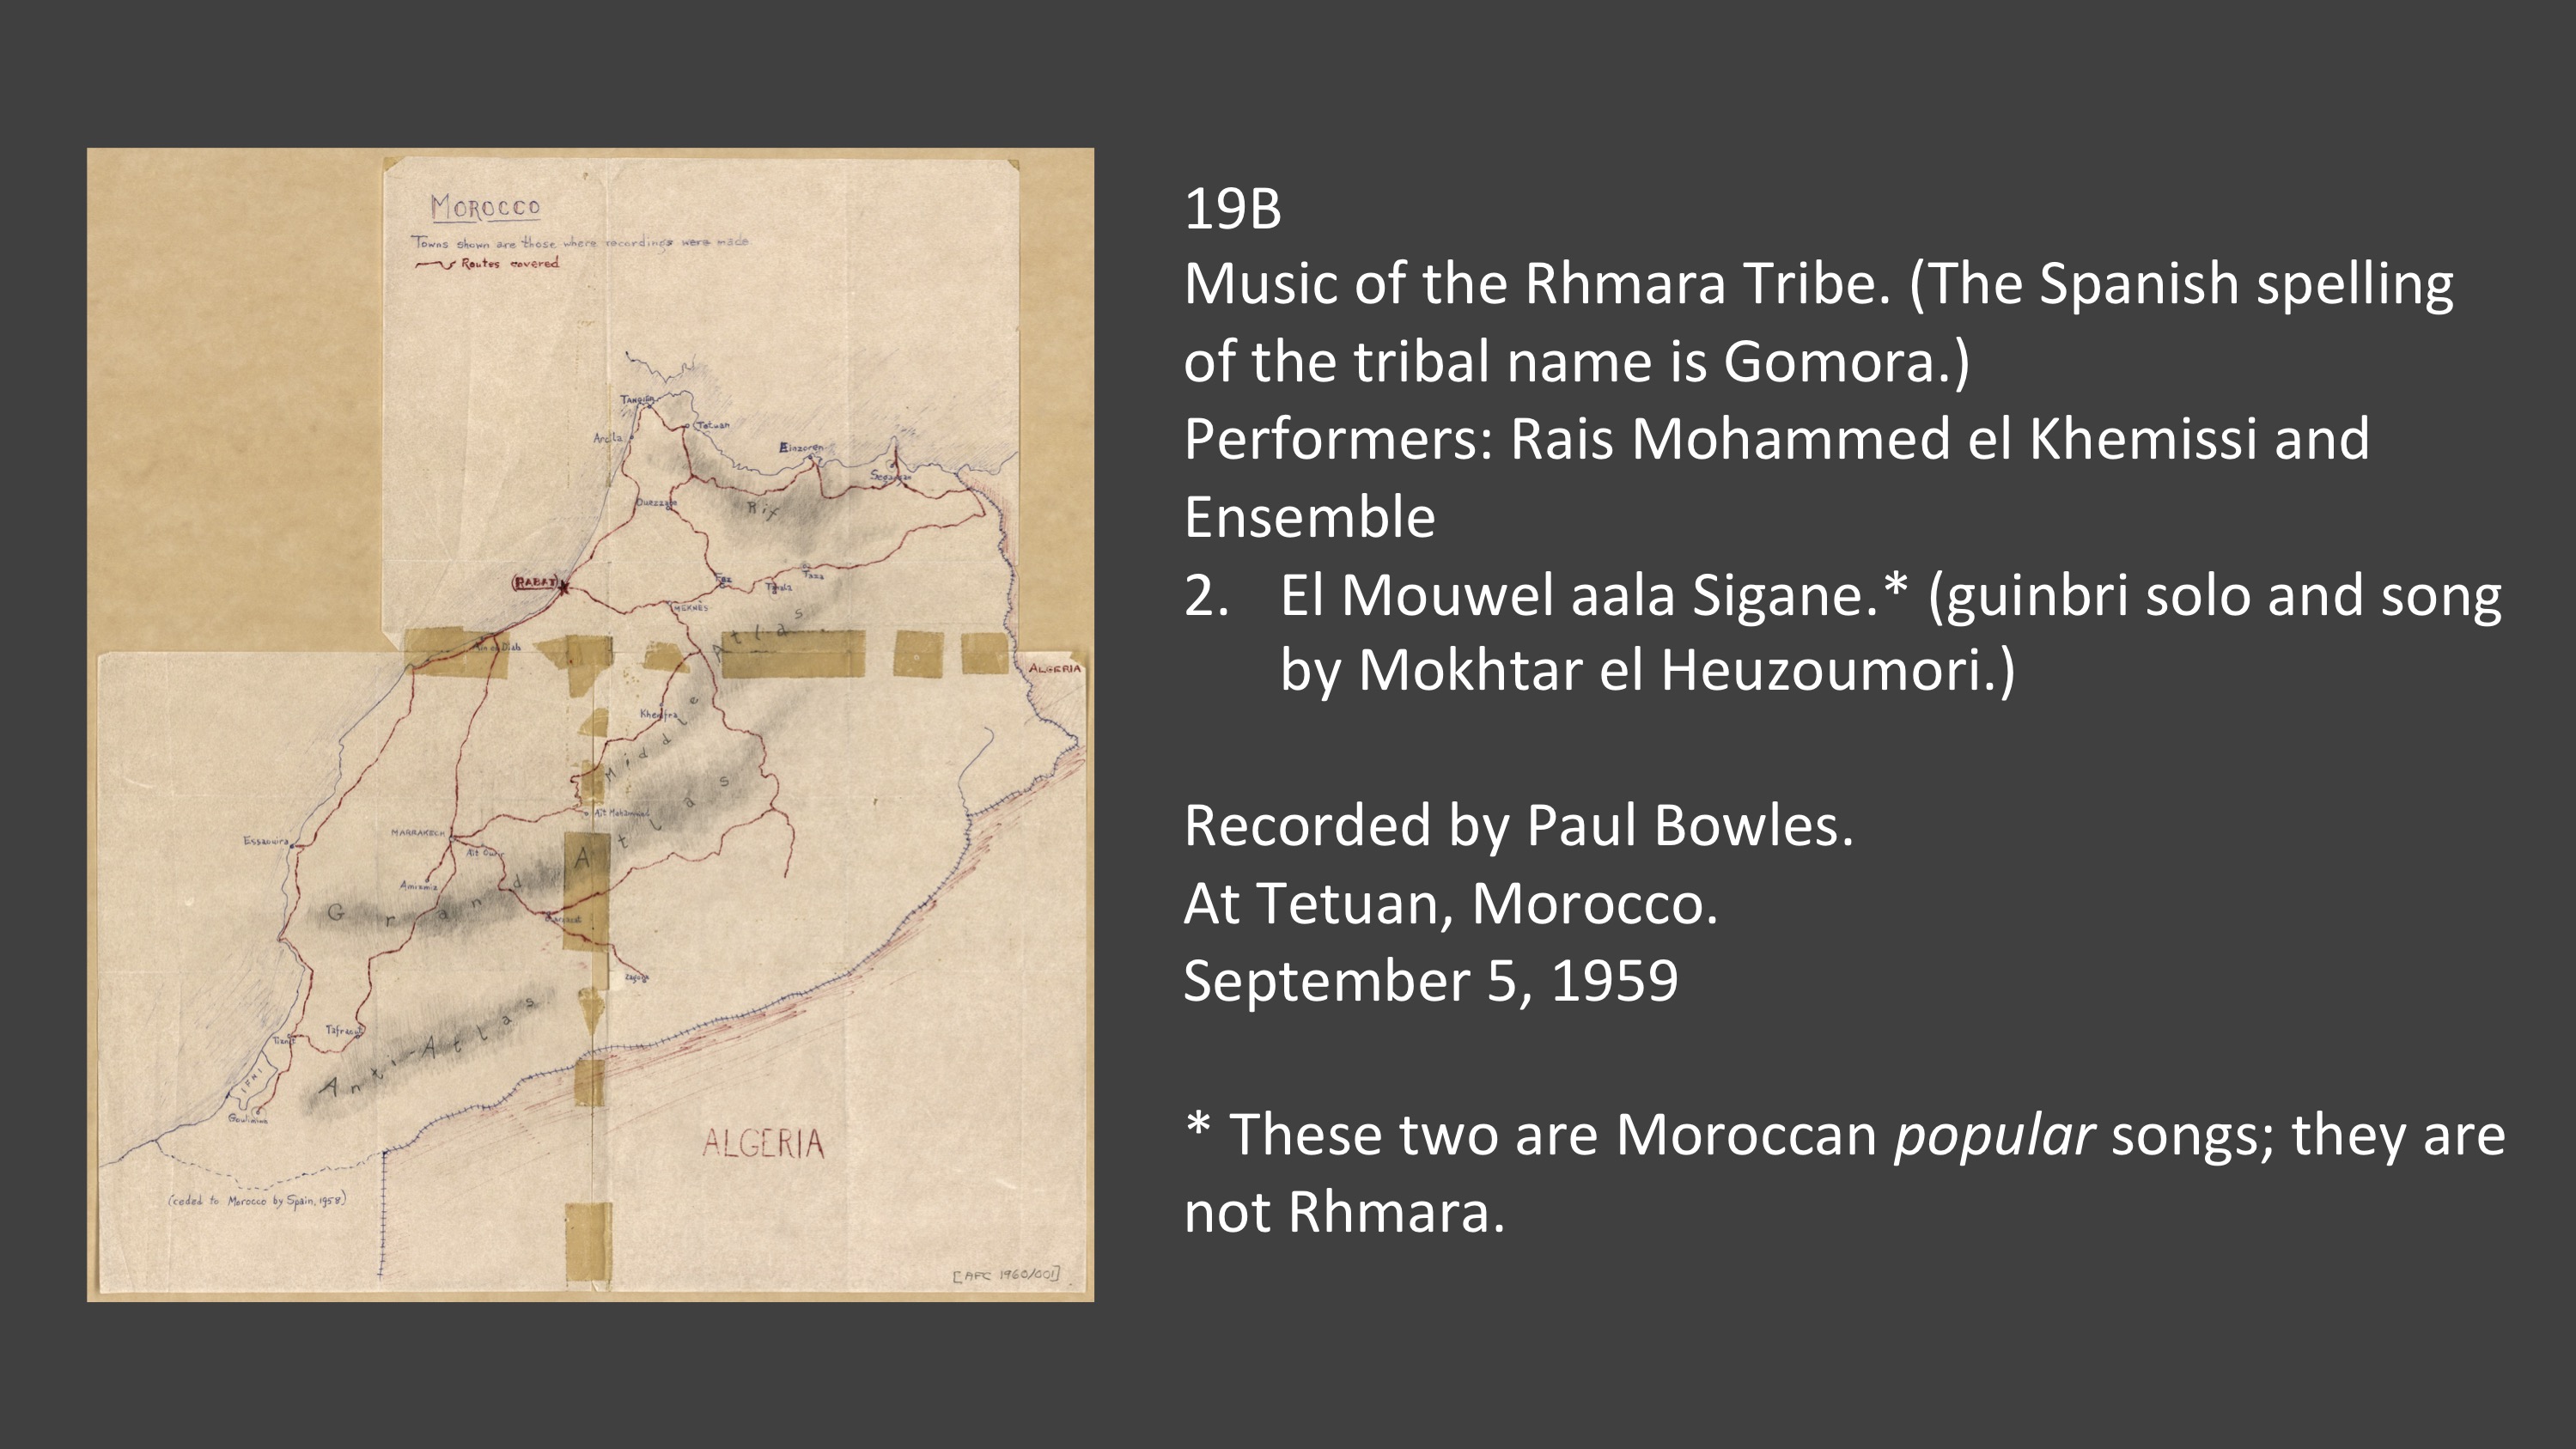 19B 2. El Mouwel aala Sigane.* (guinbri solo and song by Mokhtar el Heuzoumori.)

Music of the Rhmara Tribe. (The Spanish spelling of the tribal name is Gomora.)
Performers: Rais Mohammed el Khemissi and Ensemble
El Mouwel aala Sigane.* (guinbri solo and song by Mokhtar el Heuzoumori.)

Recorded by Paul Bowles.
At Tetuan, Morocco.
September 5, 1959

* These two are Moroccan popular songs; they are not Rhmara.